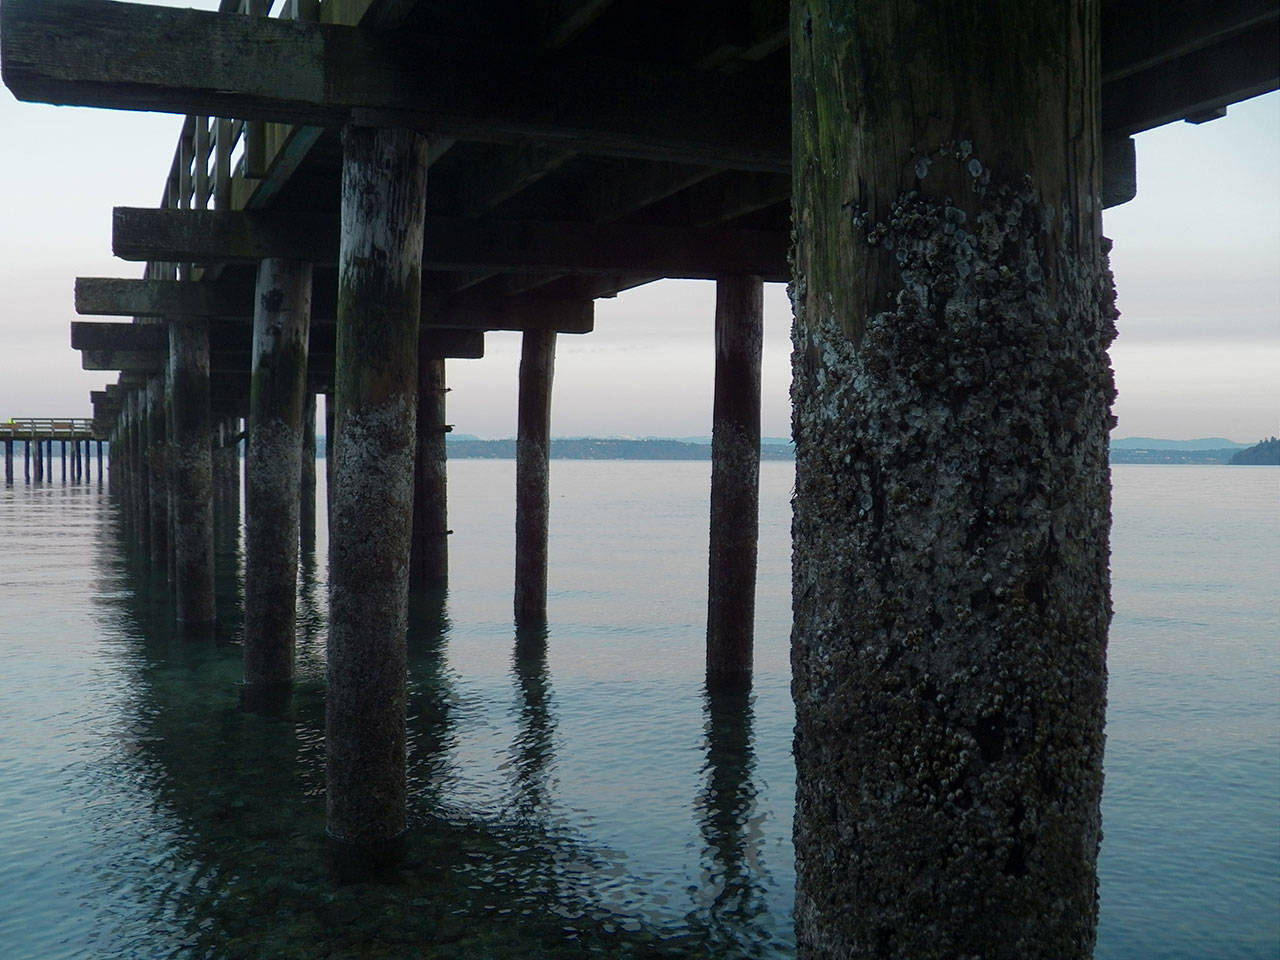 Nearly a dozen pilings underneath the Tramp Harbor dock were cited in a 2015 report as being compromised (Paul Rowley/Staff Photo).